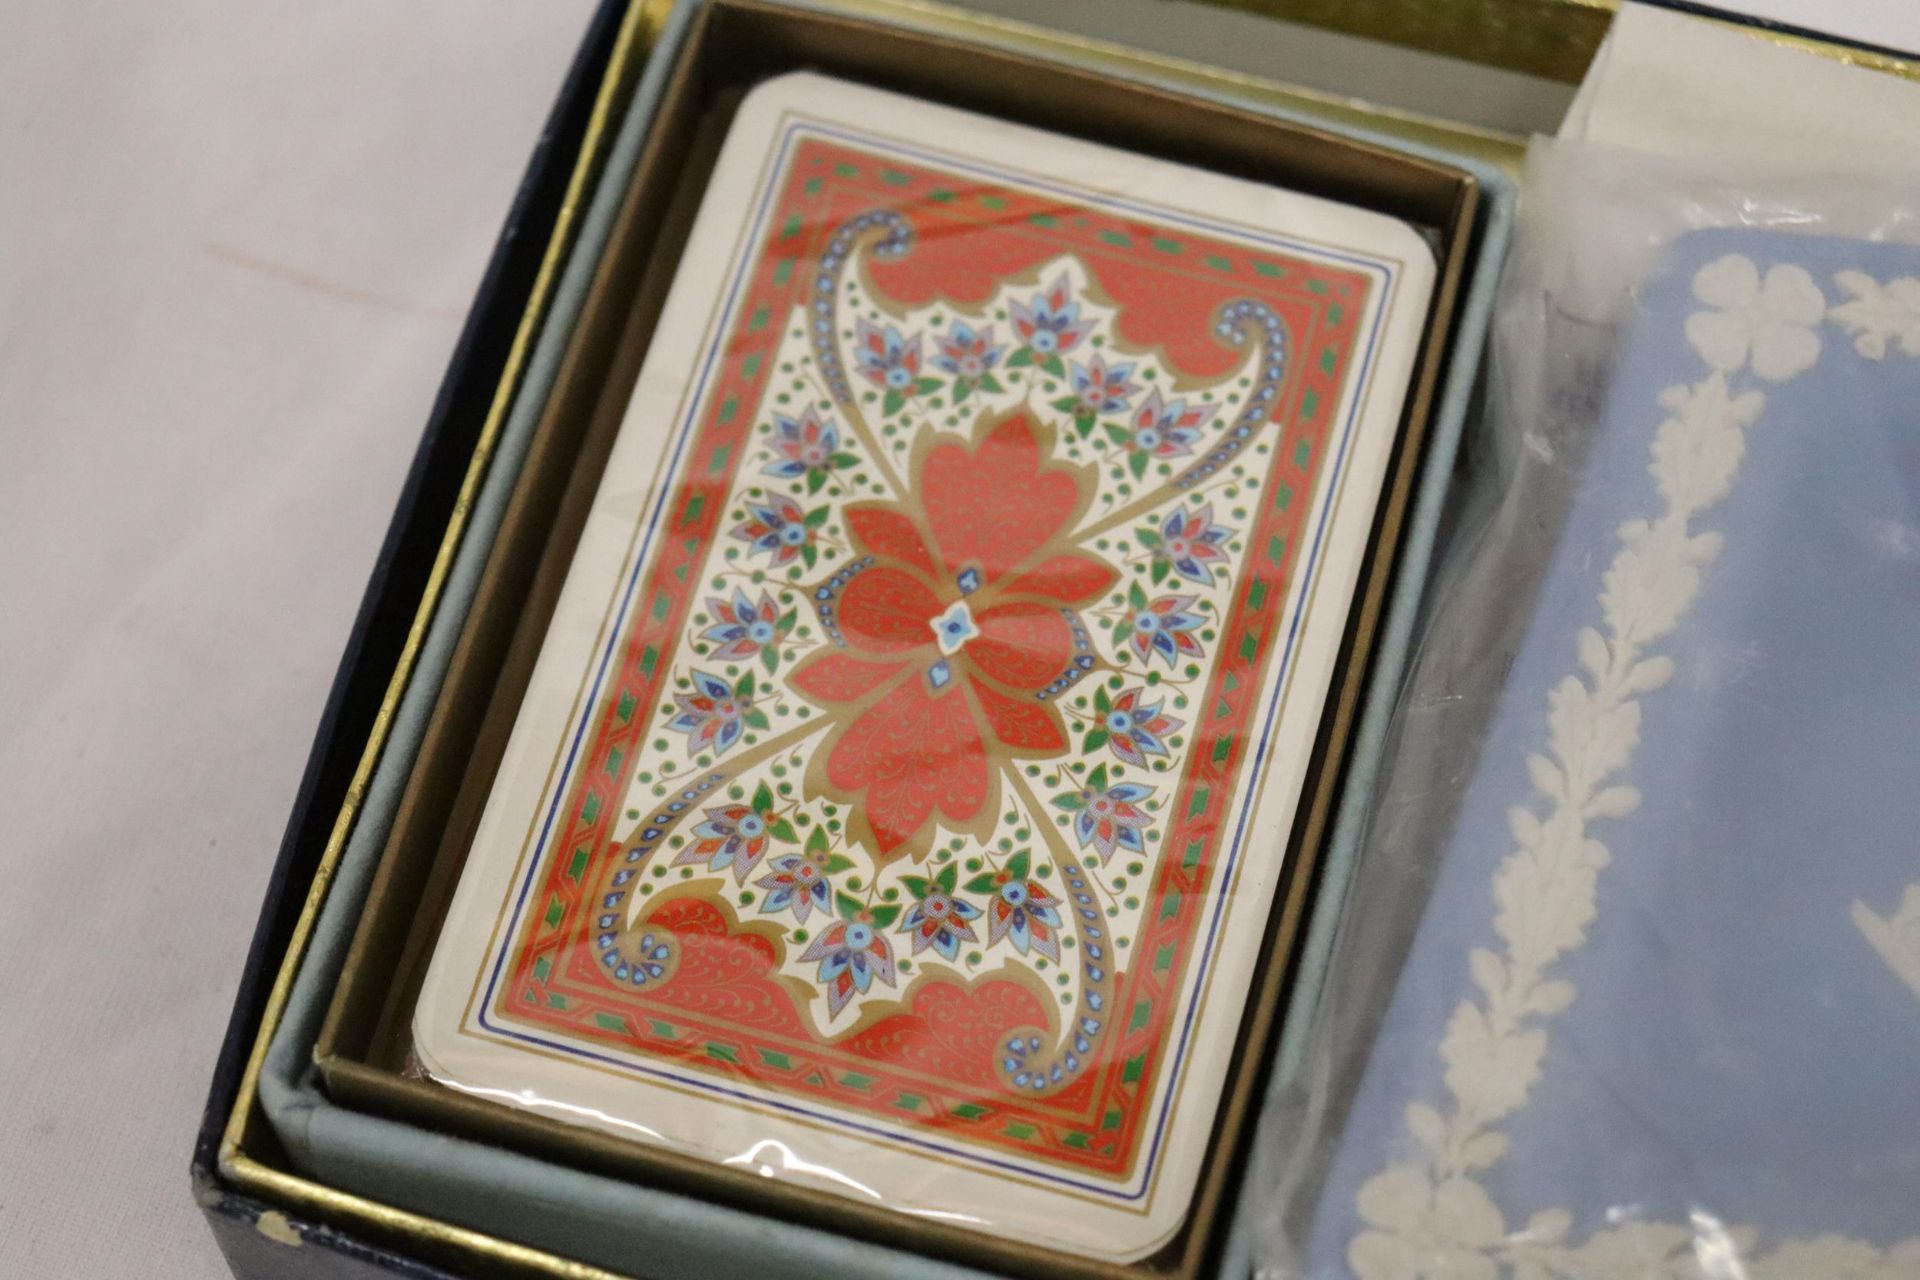 A WADDINGTONS WEDGWOOD JASPER CARD TRAY WITH PLAYING CARDS - Image 3 of 5